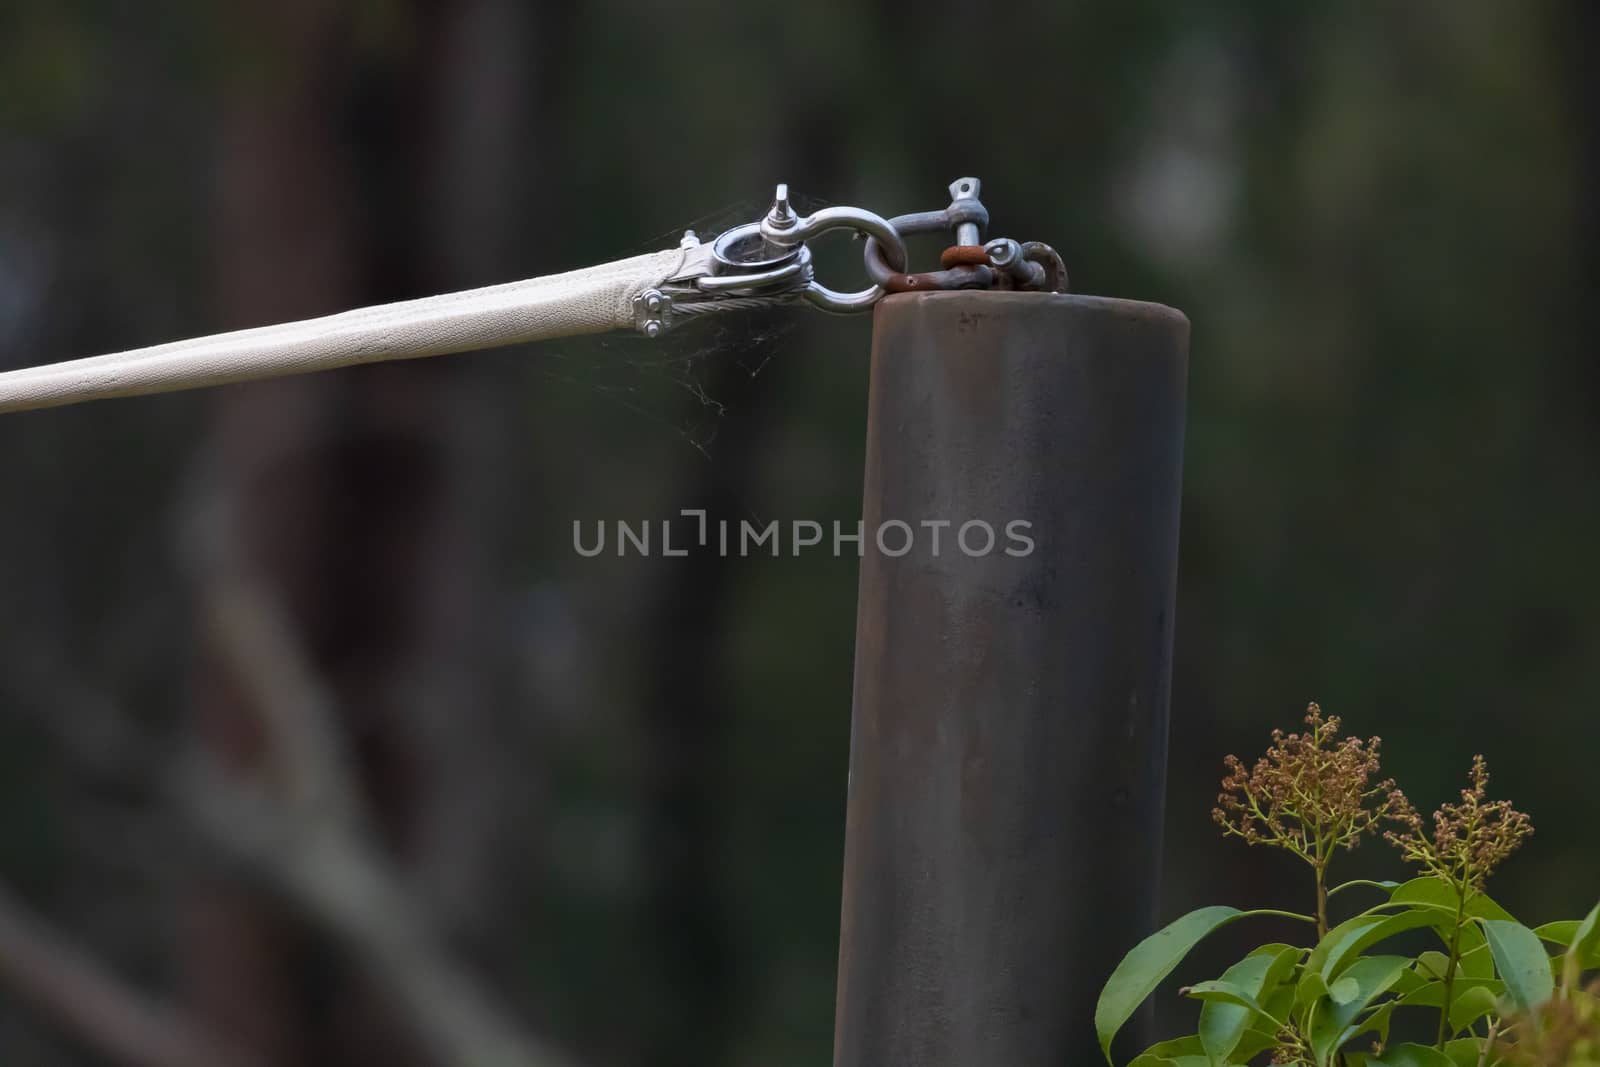 A stainless steel turnbuckle shackle connected to a black metal pole by WittkePhotos